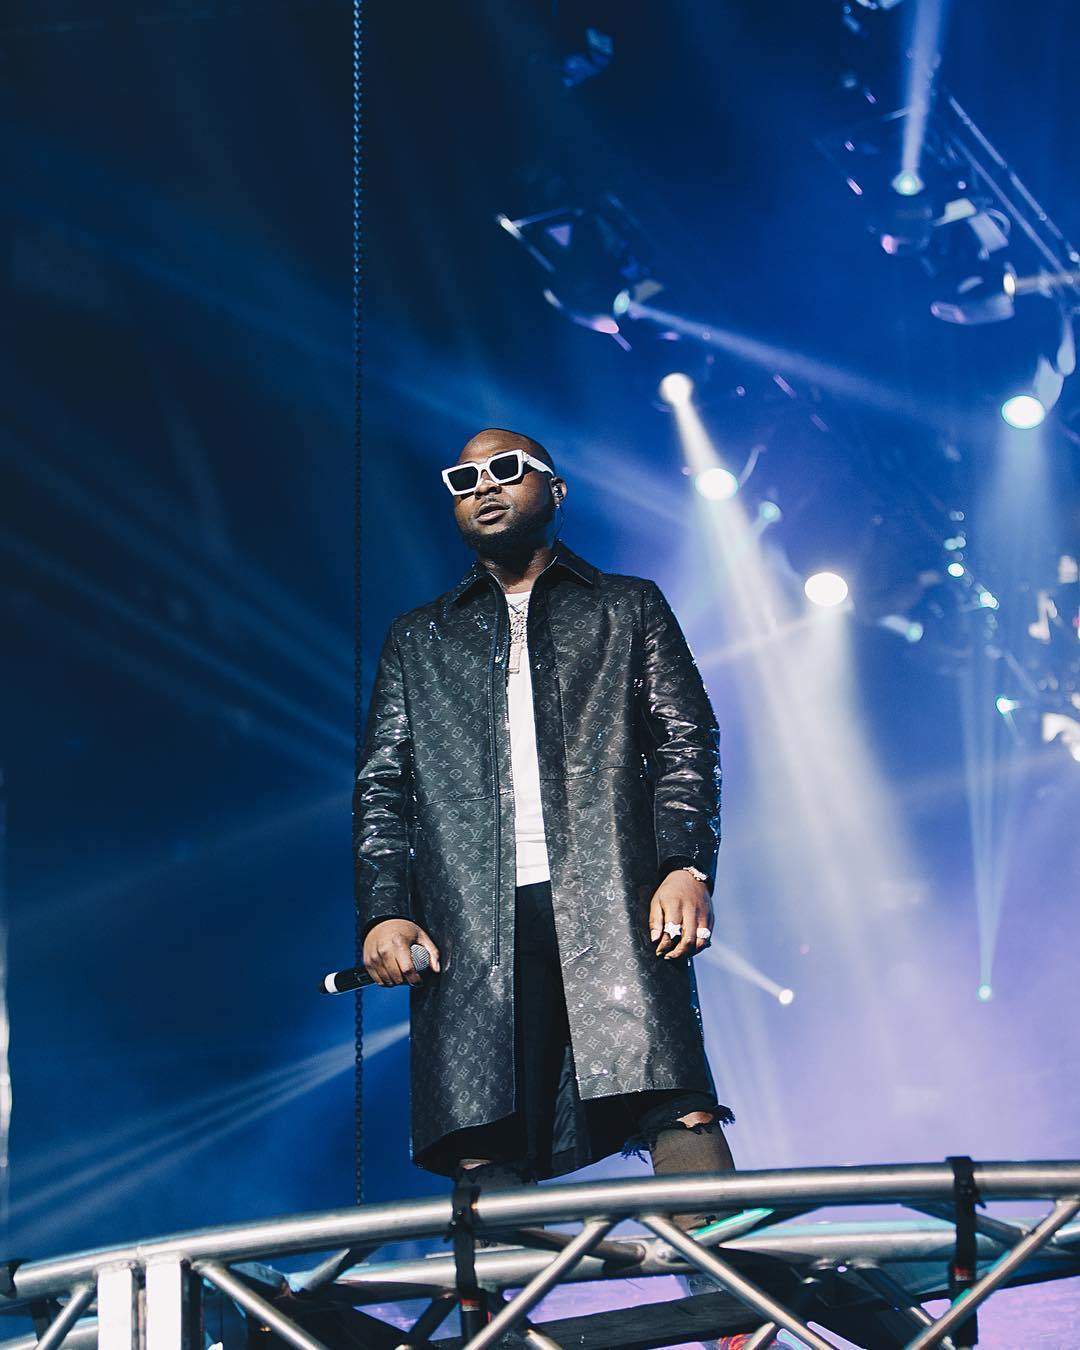 Davido paid £55,000 to wait for seats to be filled at 02 Arena